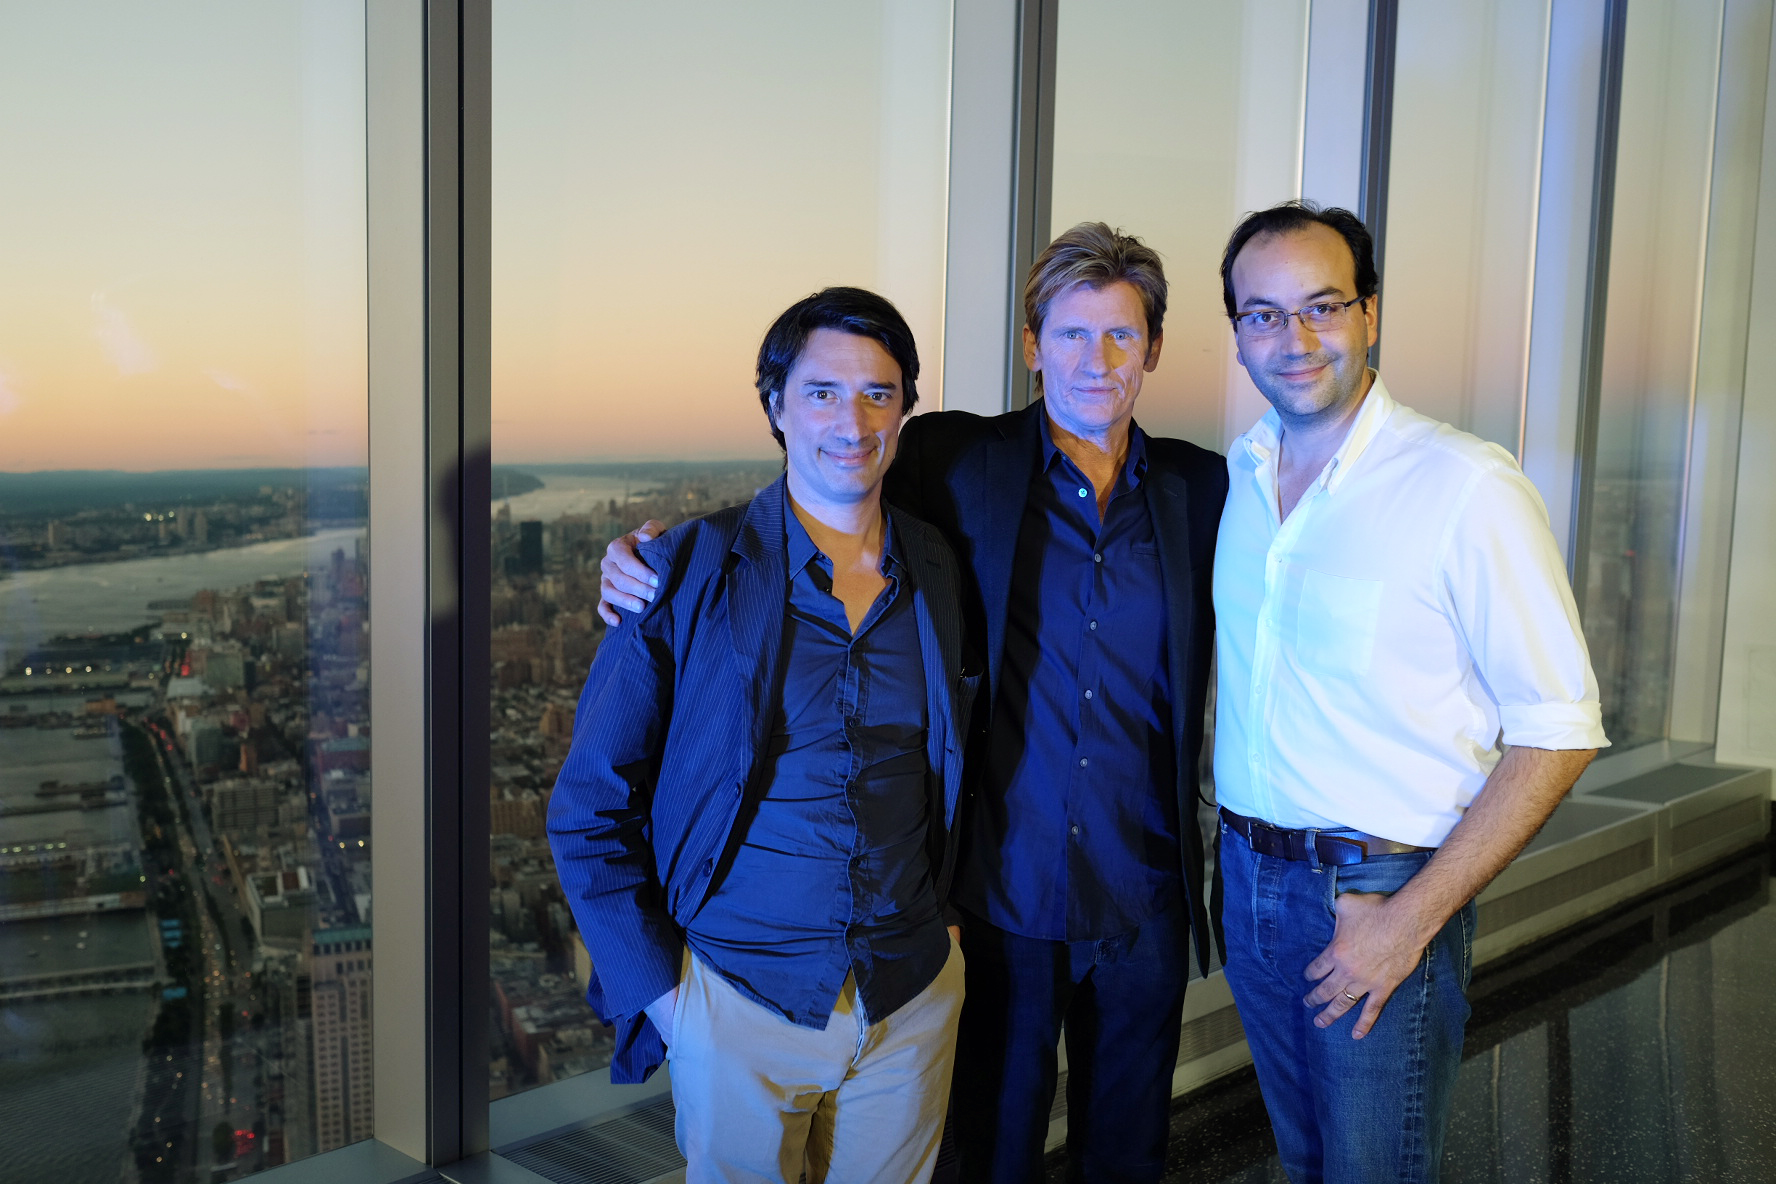 Denis Leary (center) introduces the updated version of the documentary, directed and produced by Jules Gédéon Naudet and retired firefighter James Hanlon.